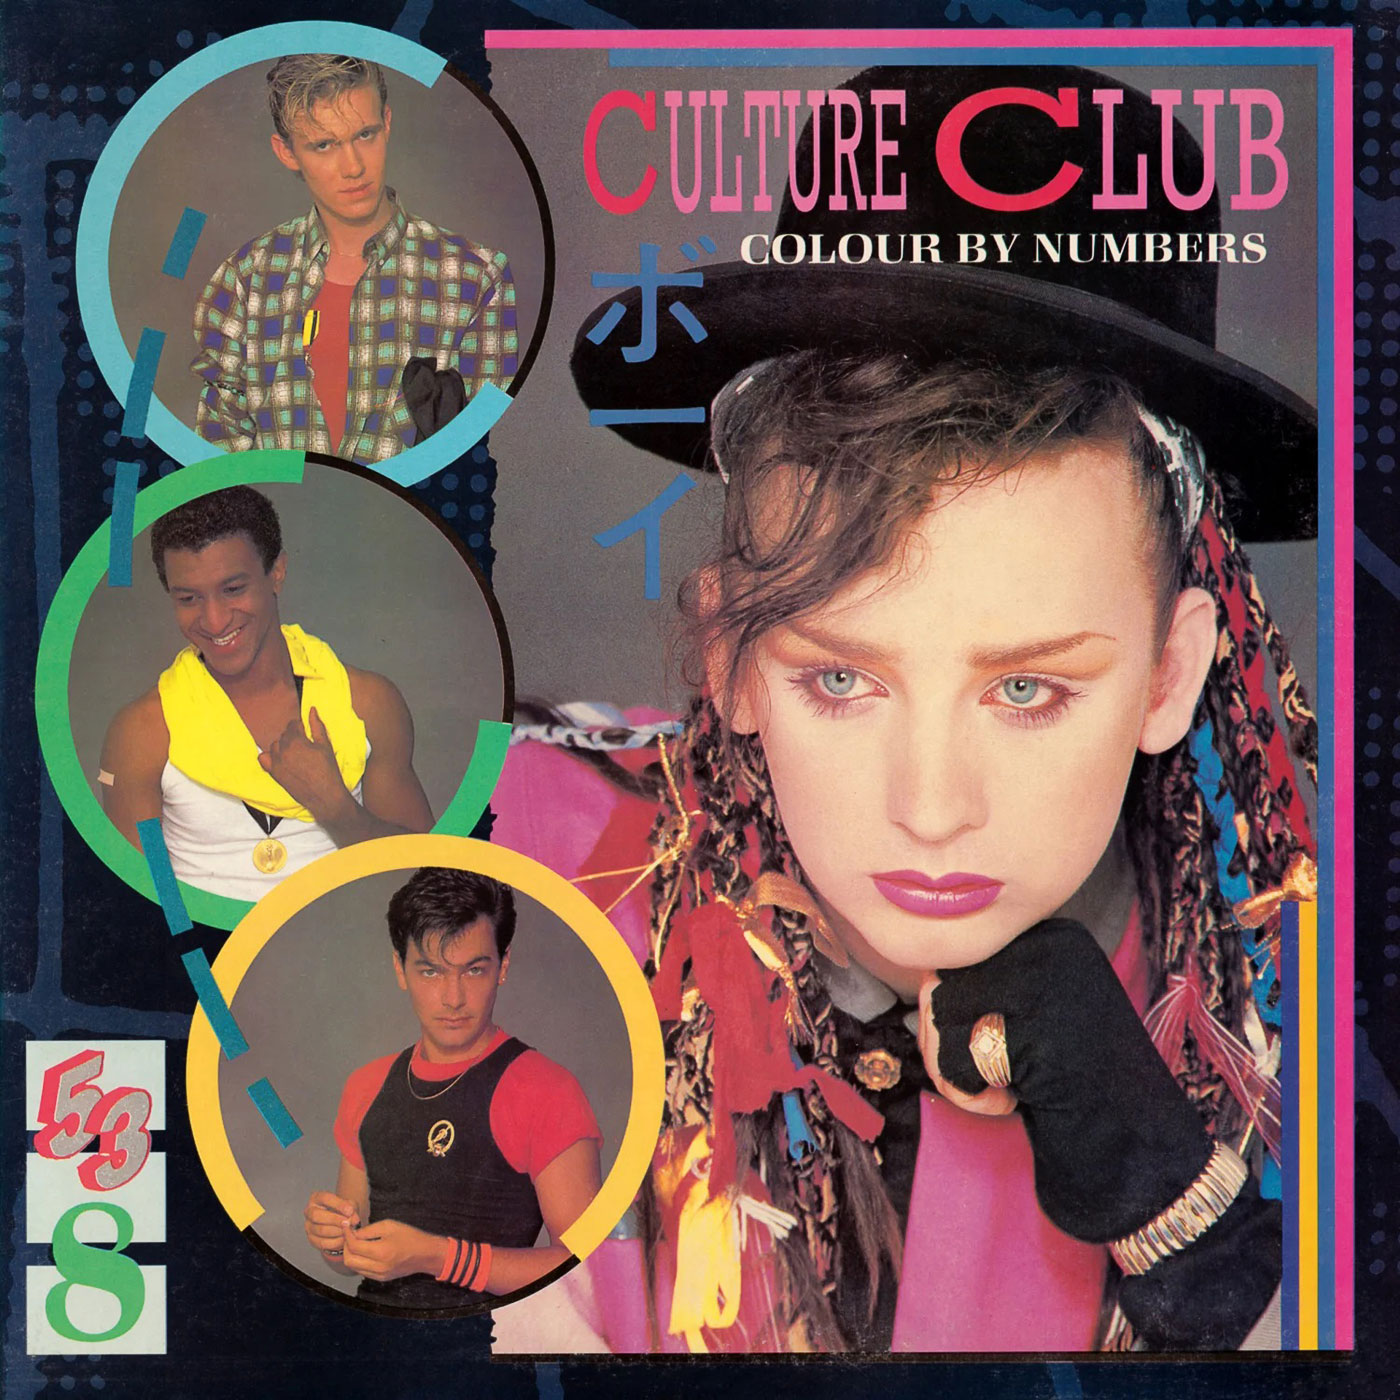 531 Culture Club – Colour by Numbers